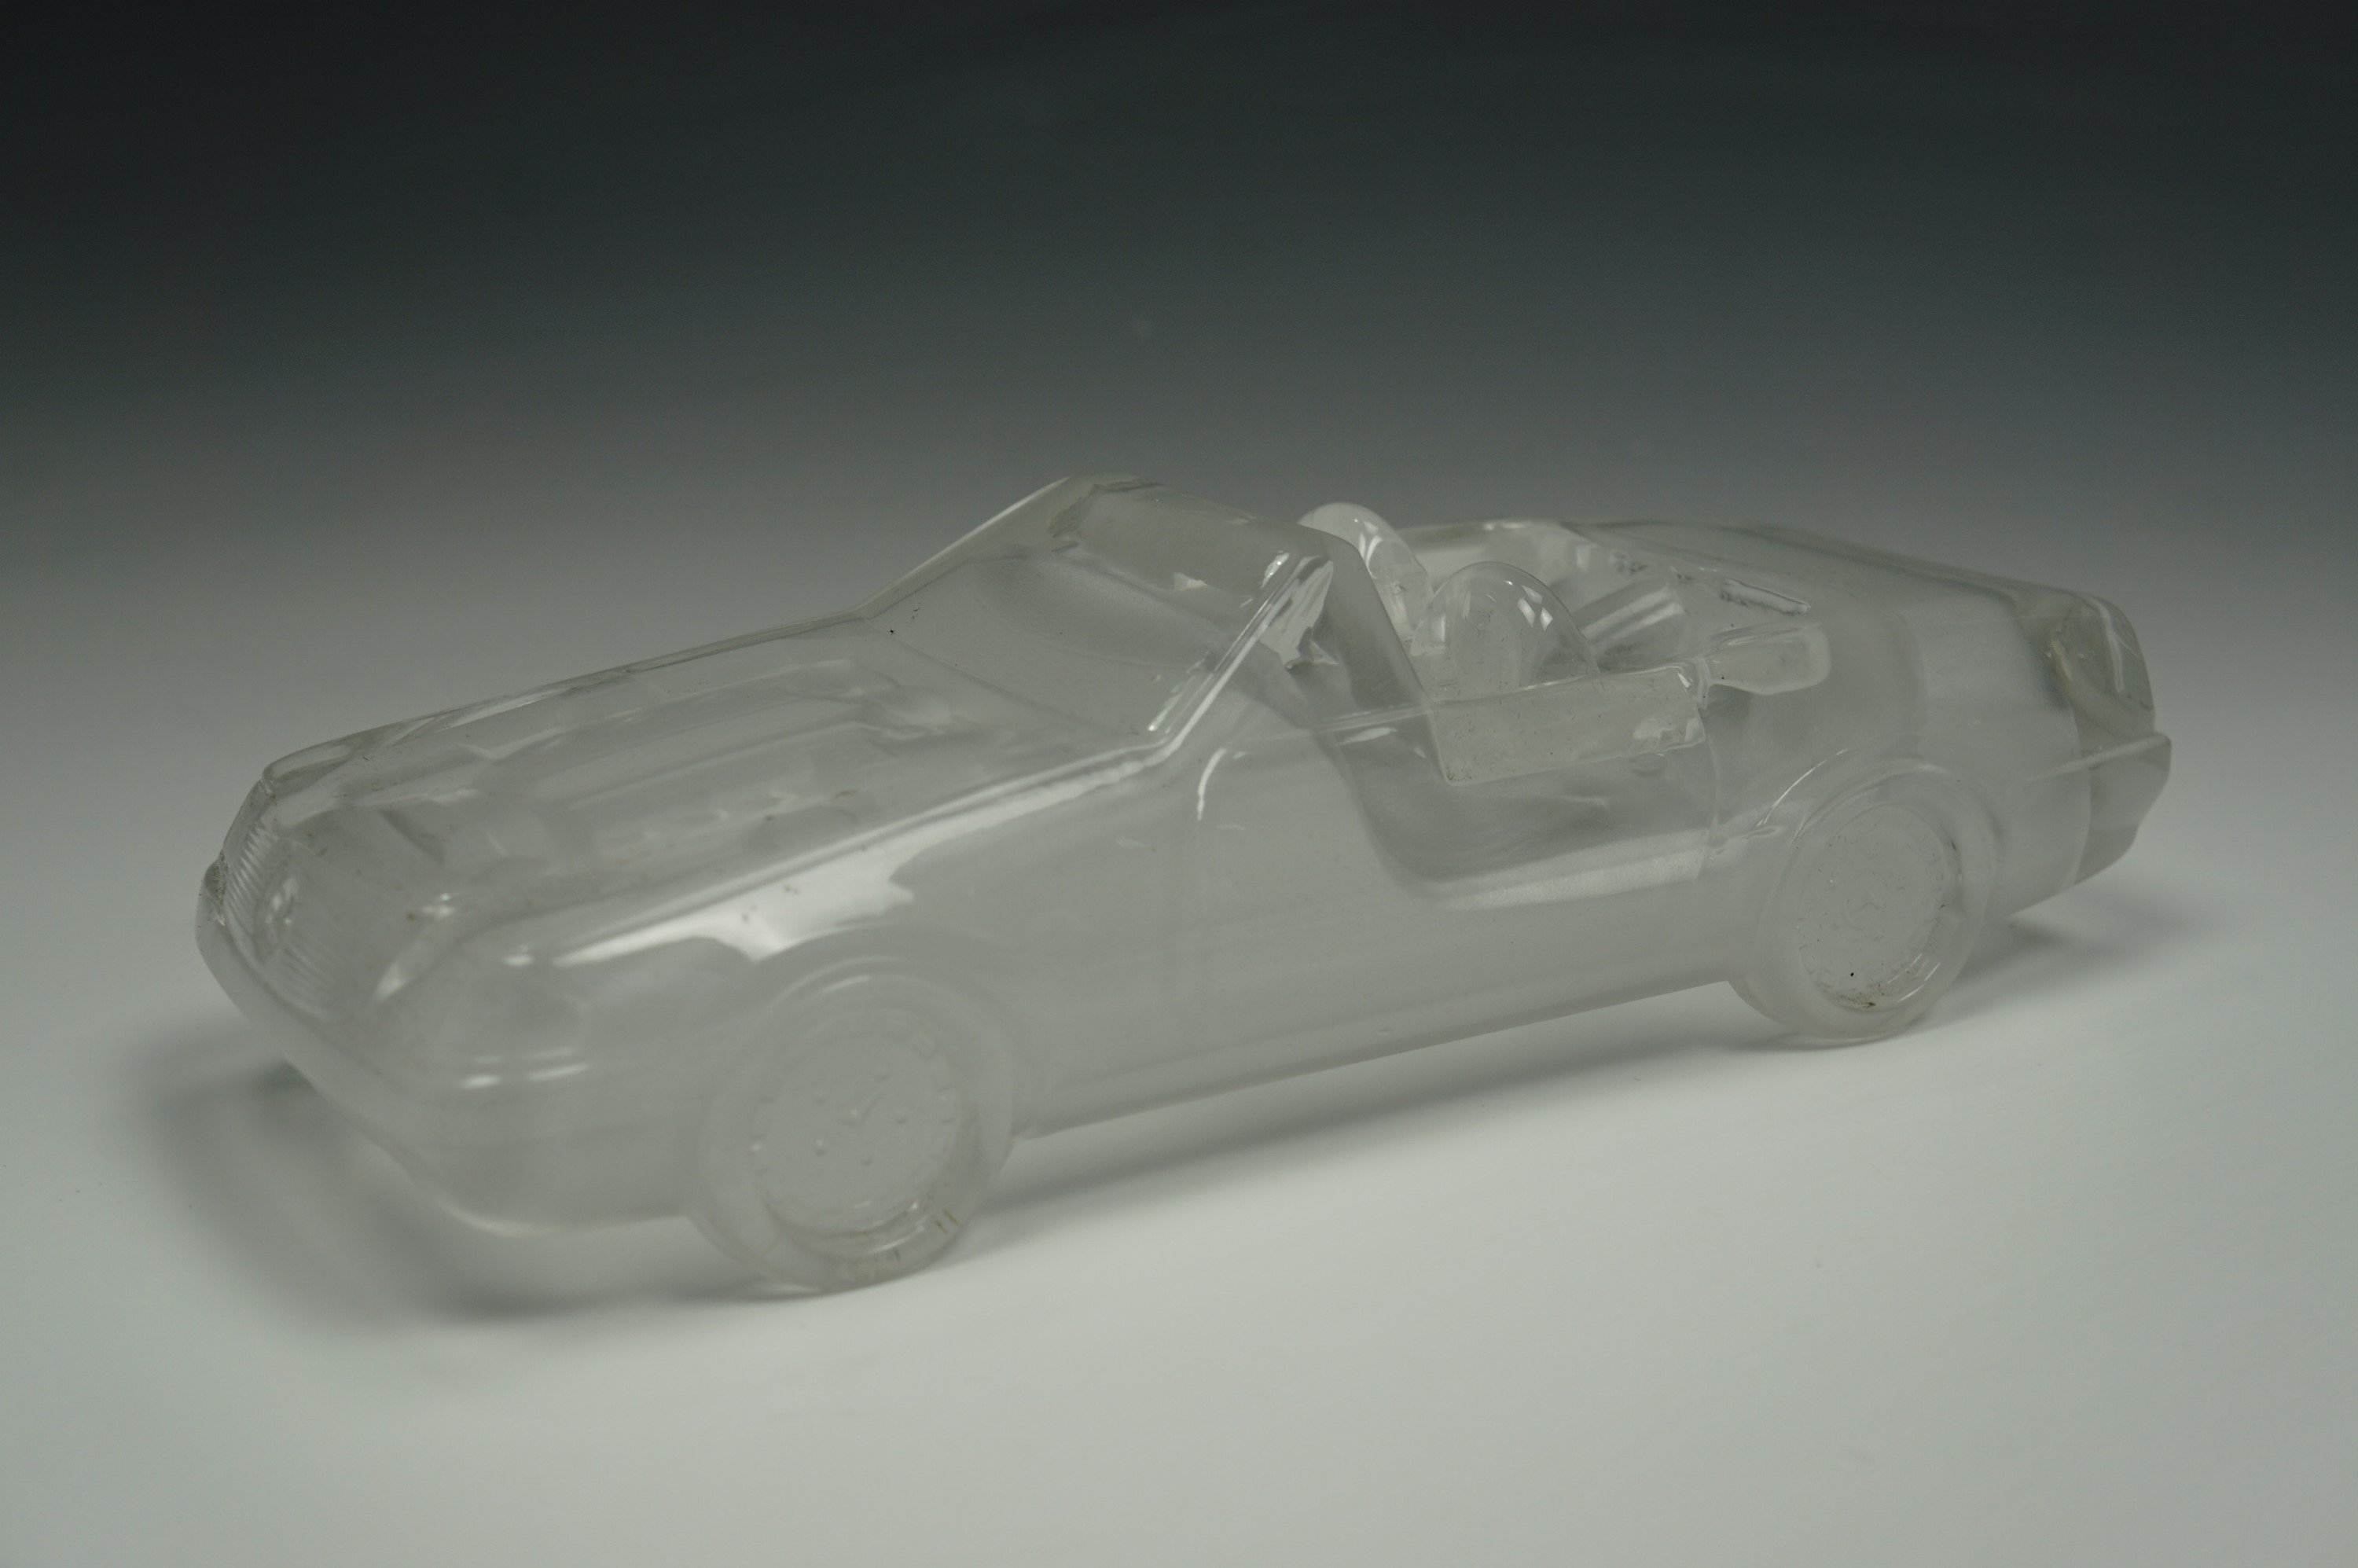 A Crystal Art 'The Classic Collection' lead crystal model of a Mercedes 500SL car - Image 2 of 2